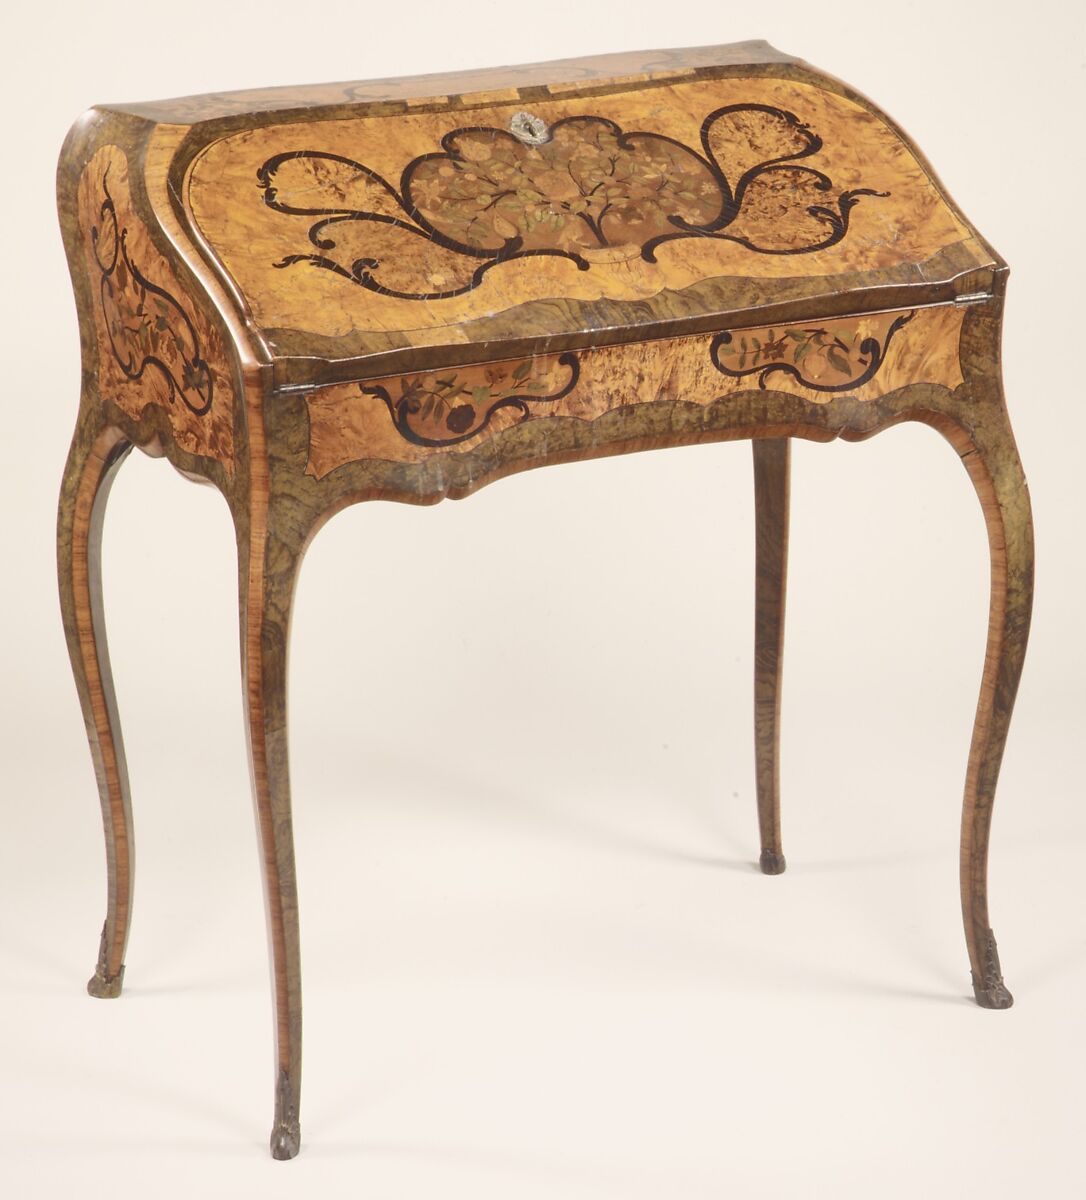 Slant-top desk, Jean-François Hache (fils, called Hache l&#39;ainé) (1730–1801/2), Walnut, kingwood and various marquetry woods, some stained; gilt bronze, French, Grenoble 